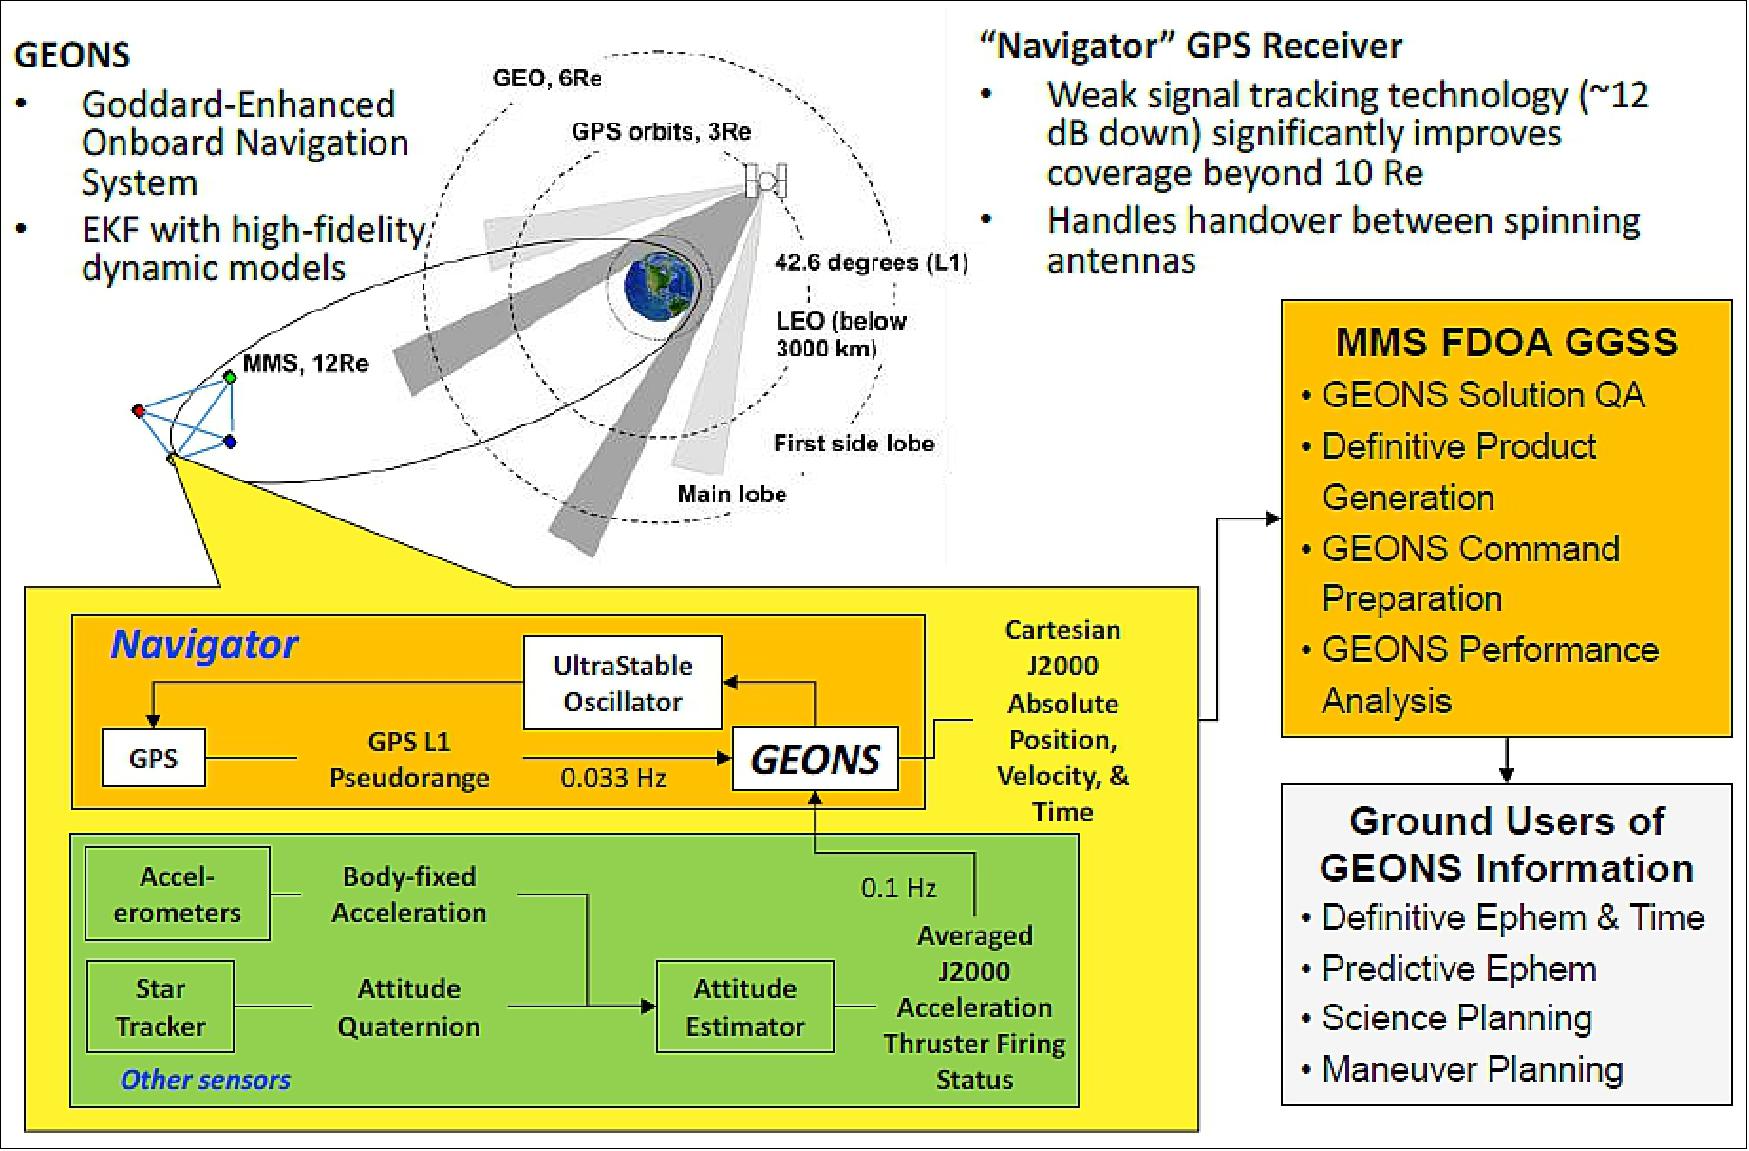 Figure 14: Overview of MMS Navigation Operations Concept (image credit: NASA/GSFC)